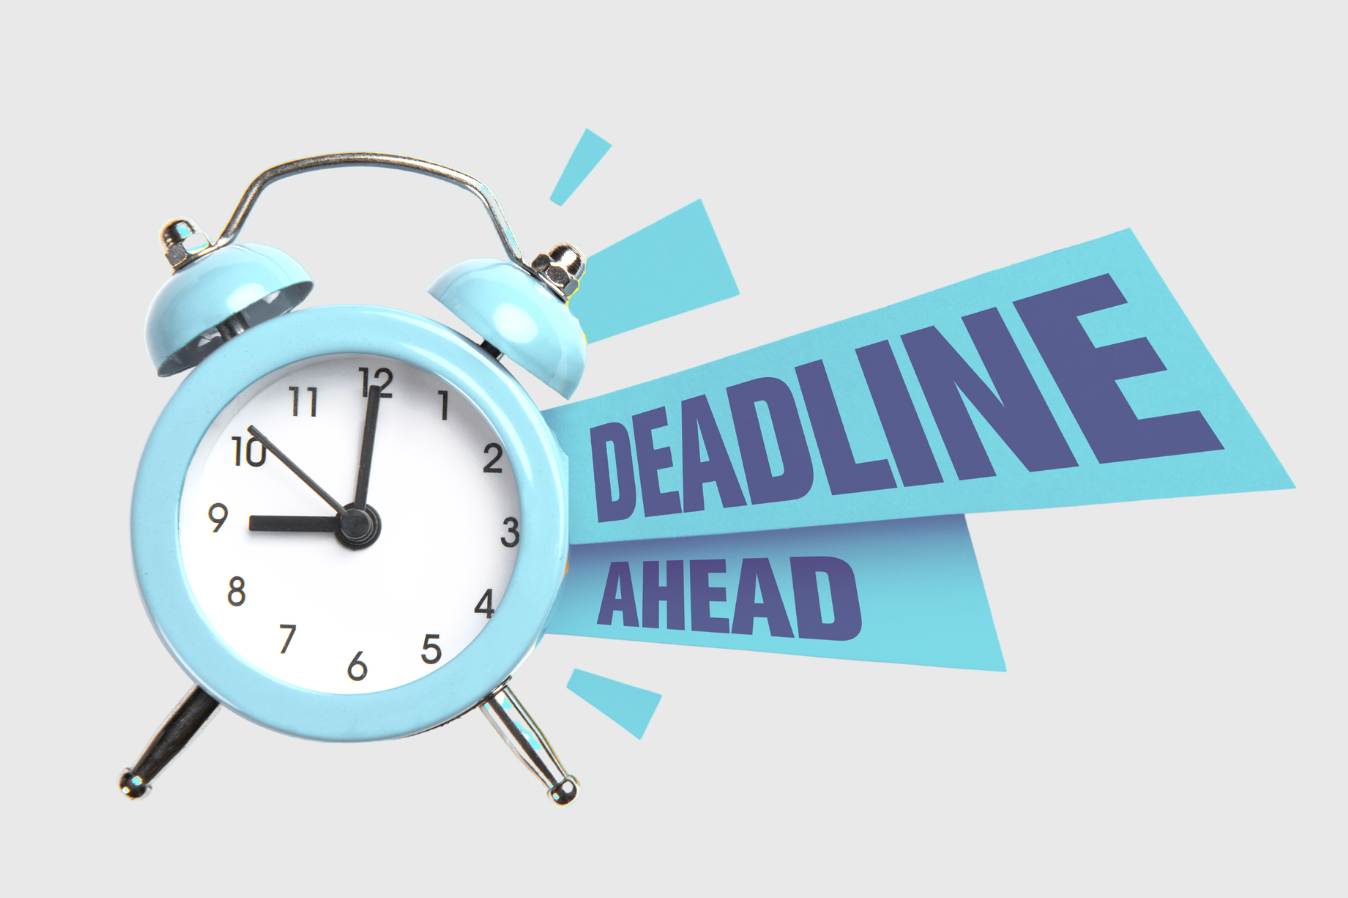 An Educator’s Guide to Application & Test Deadlines